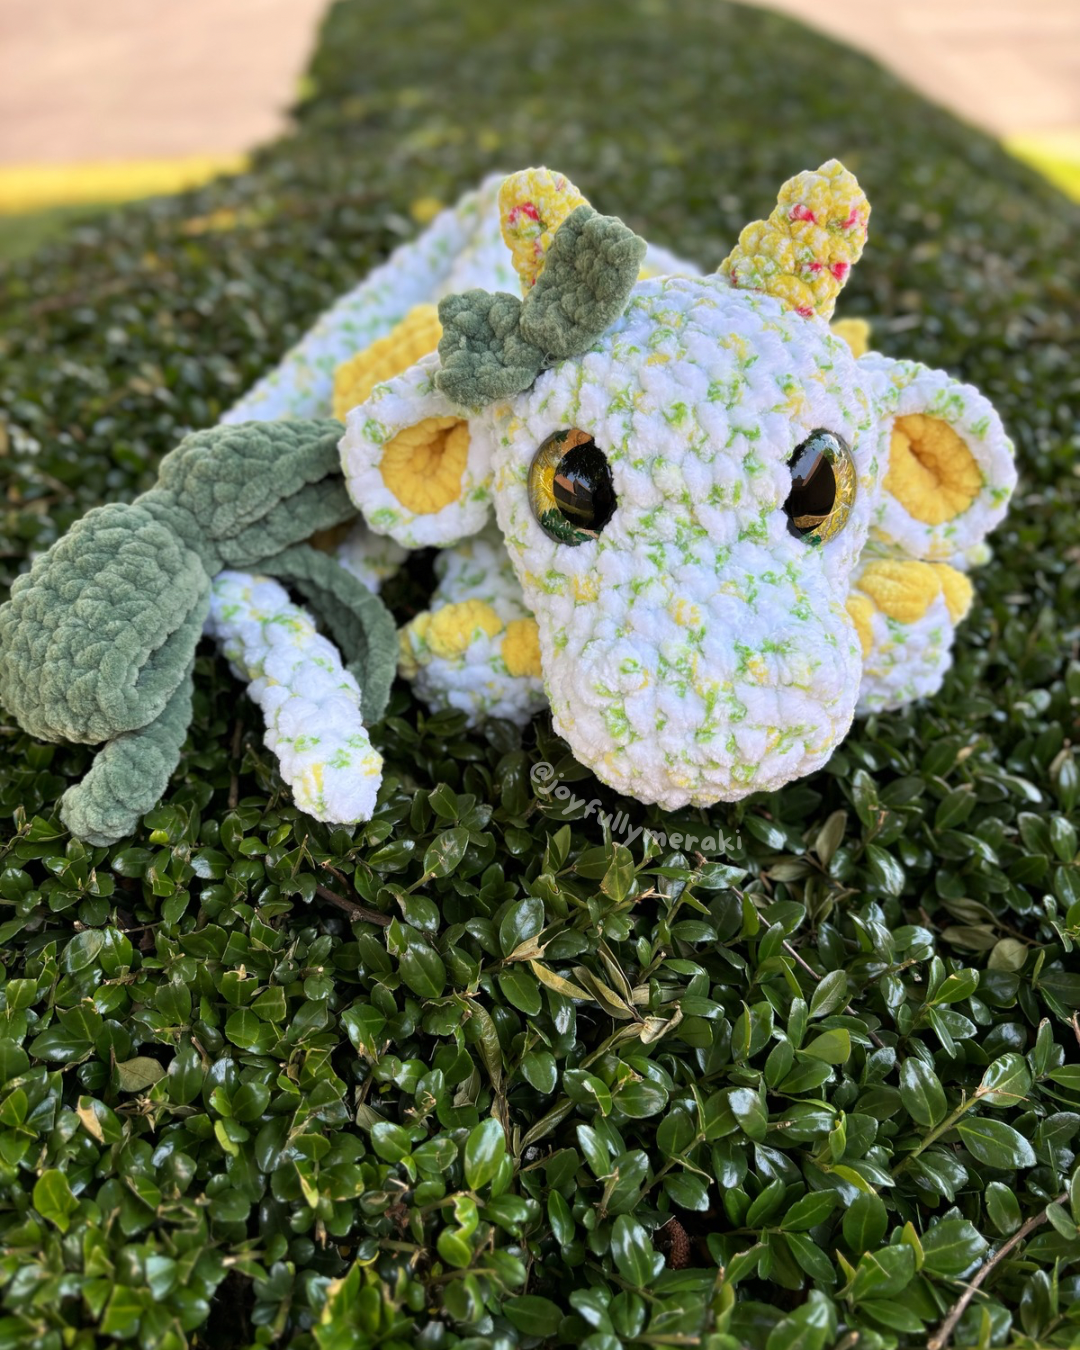 Floral Dragon Snuggler Crocheted Plushie